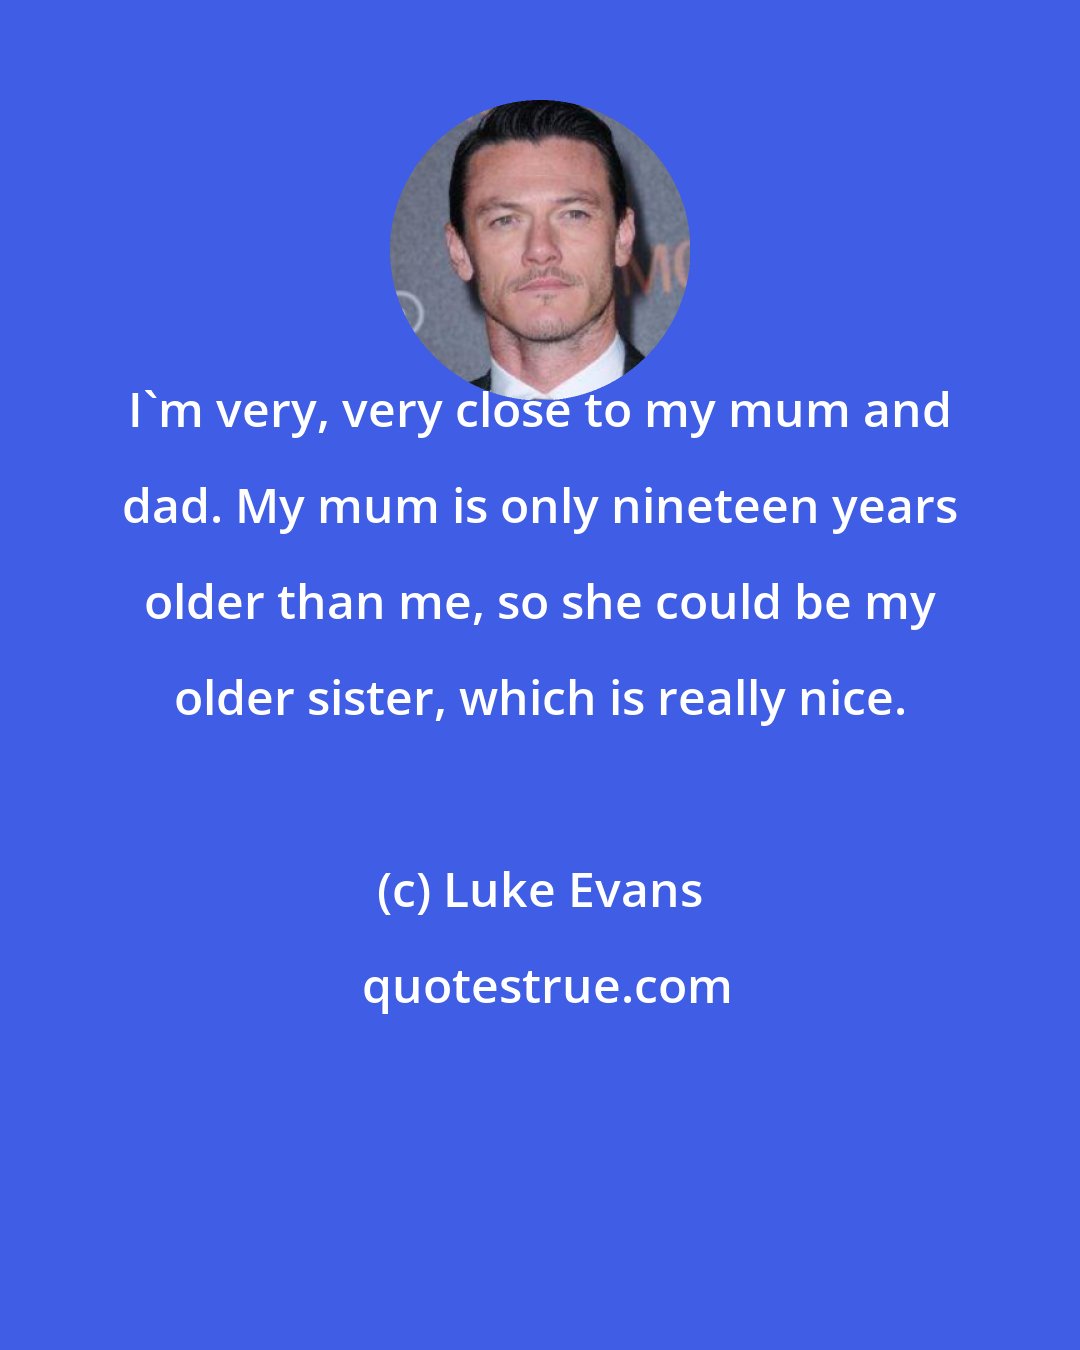 Luke Evans: I'm very, very close to my mum and dad. My mum is only nineteen years older than me, so she could be my older sister, which is really nice.